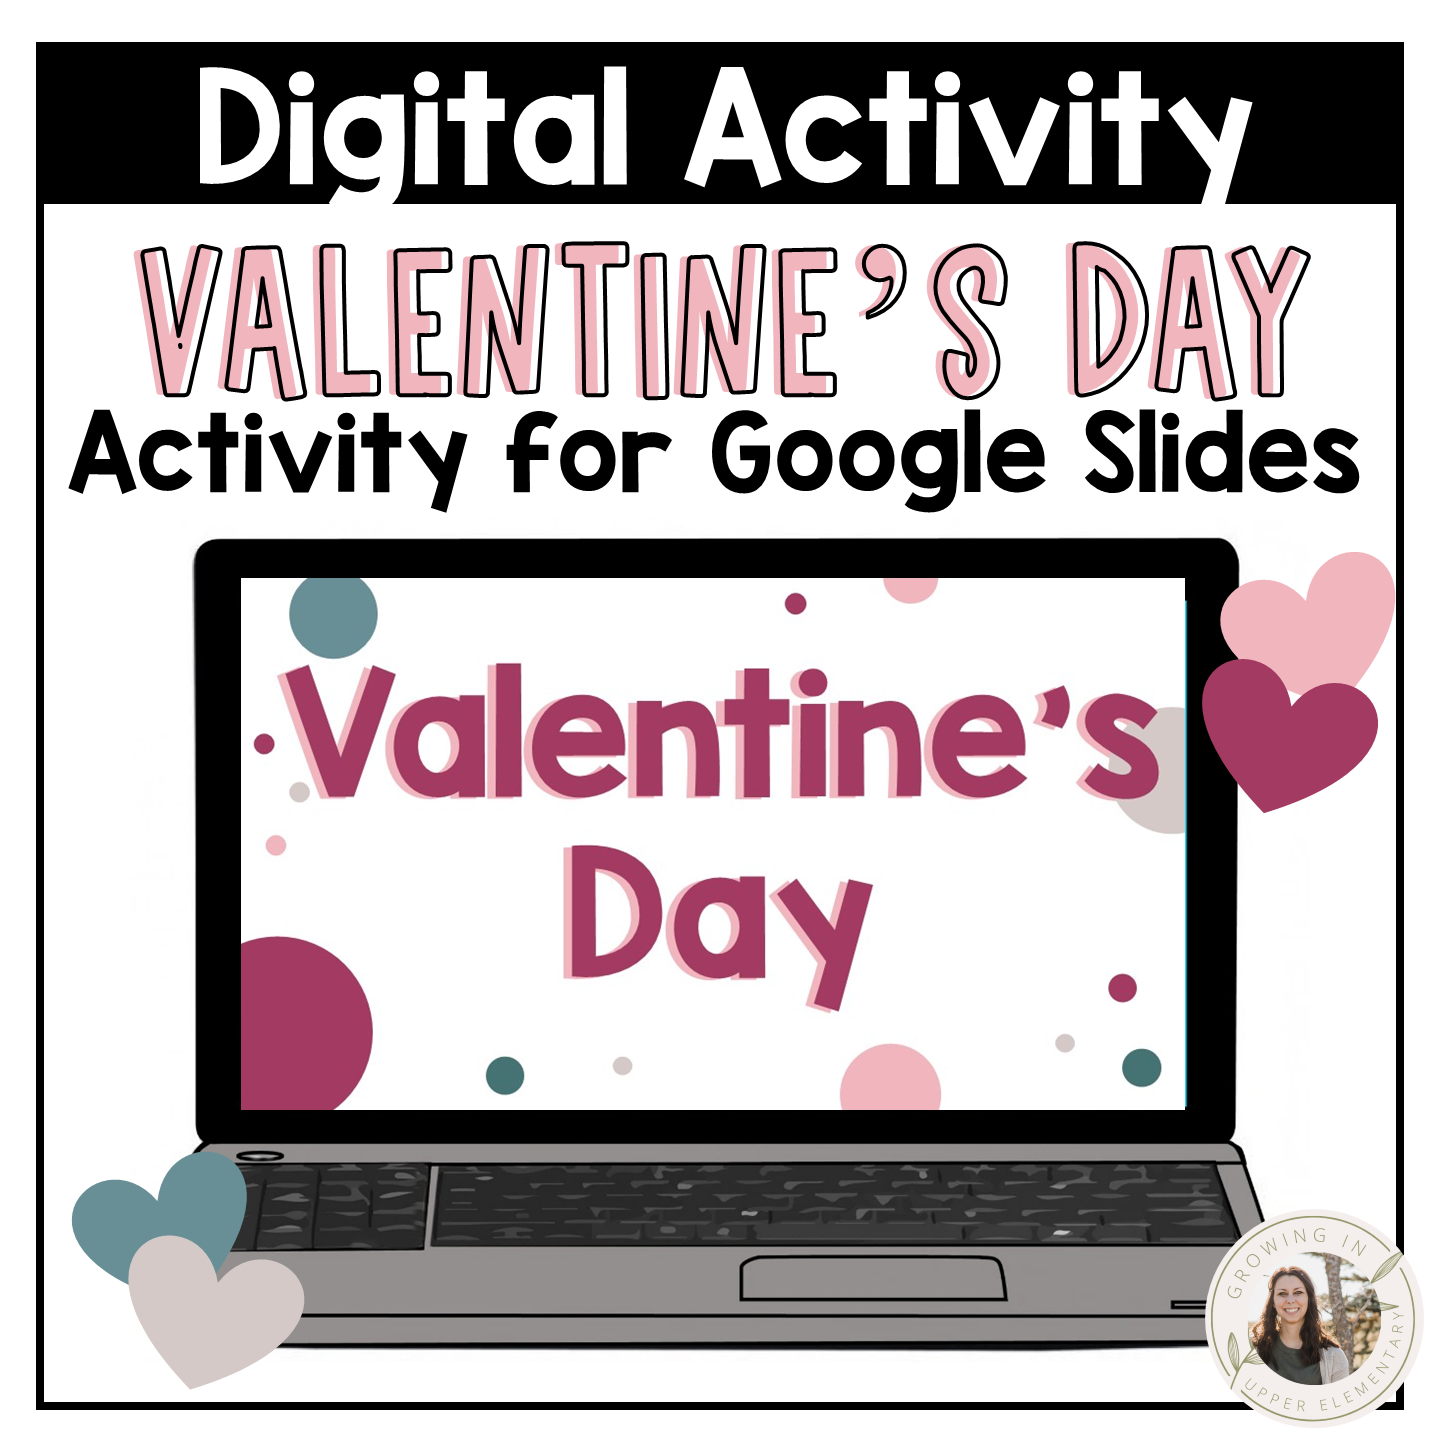 All About Valentine's Day Digital Activity for Google Slides